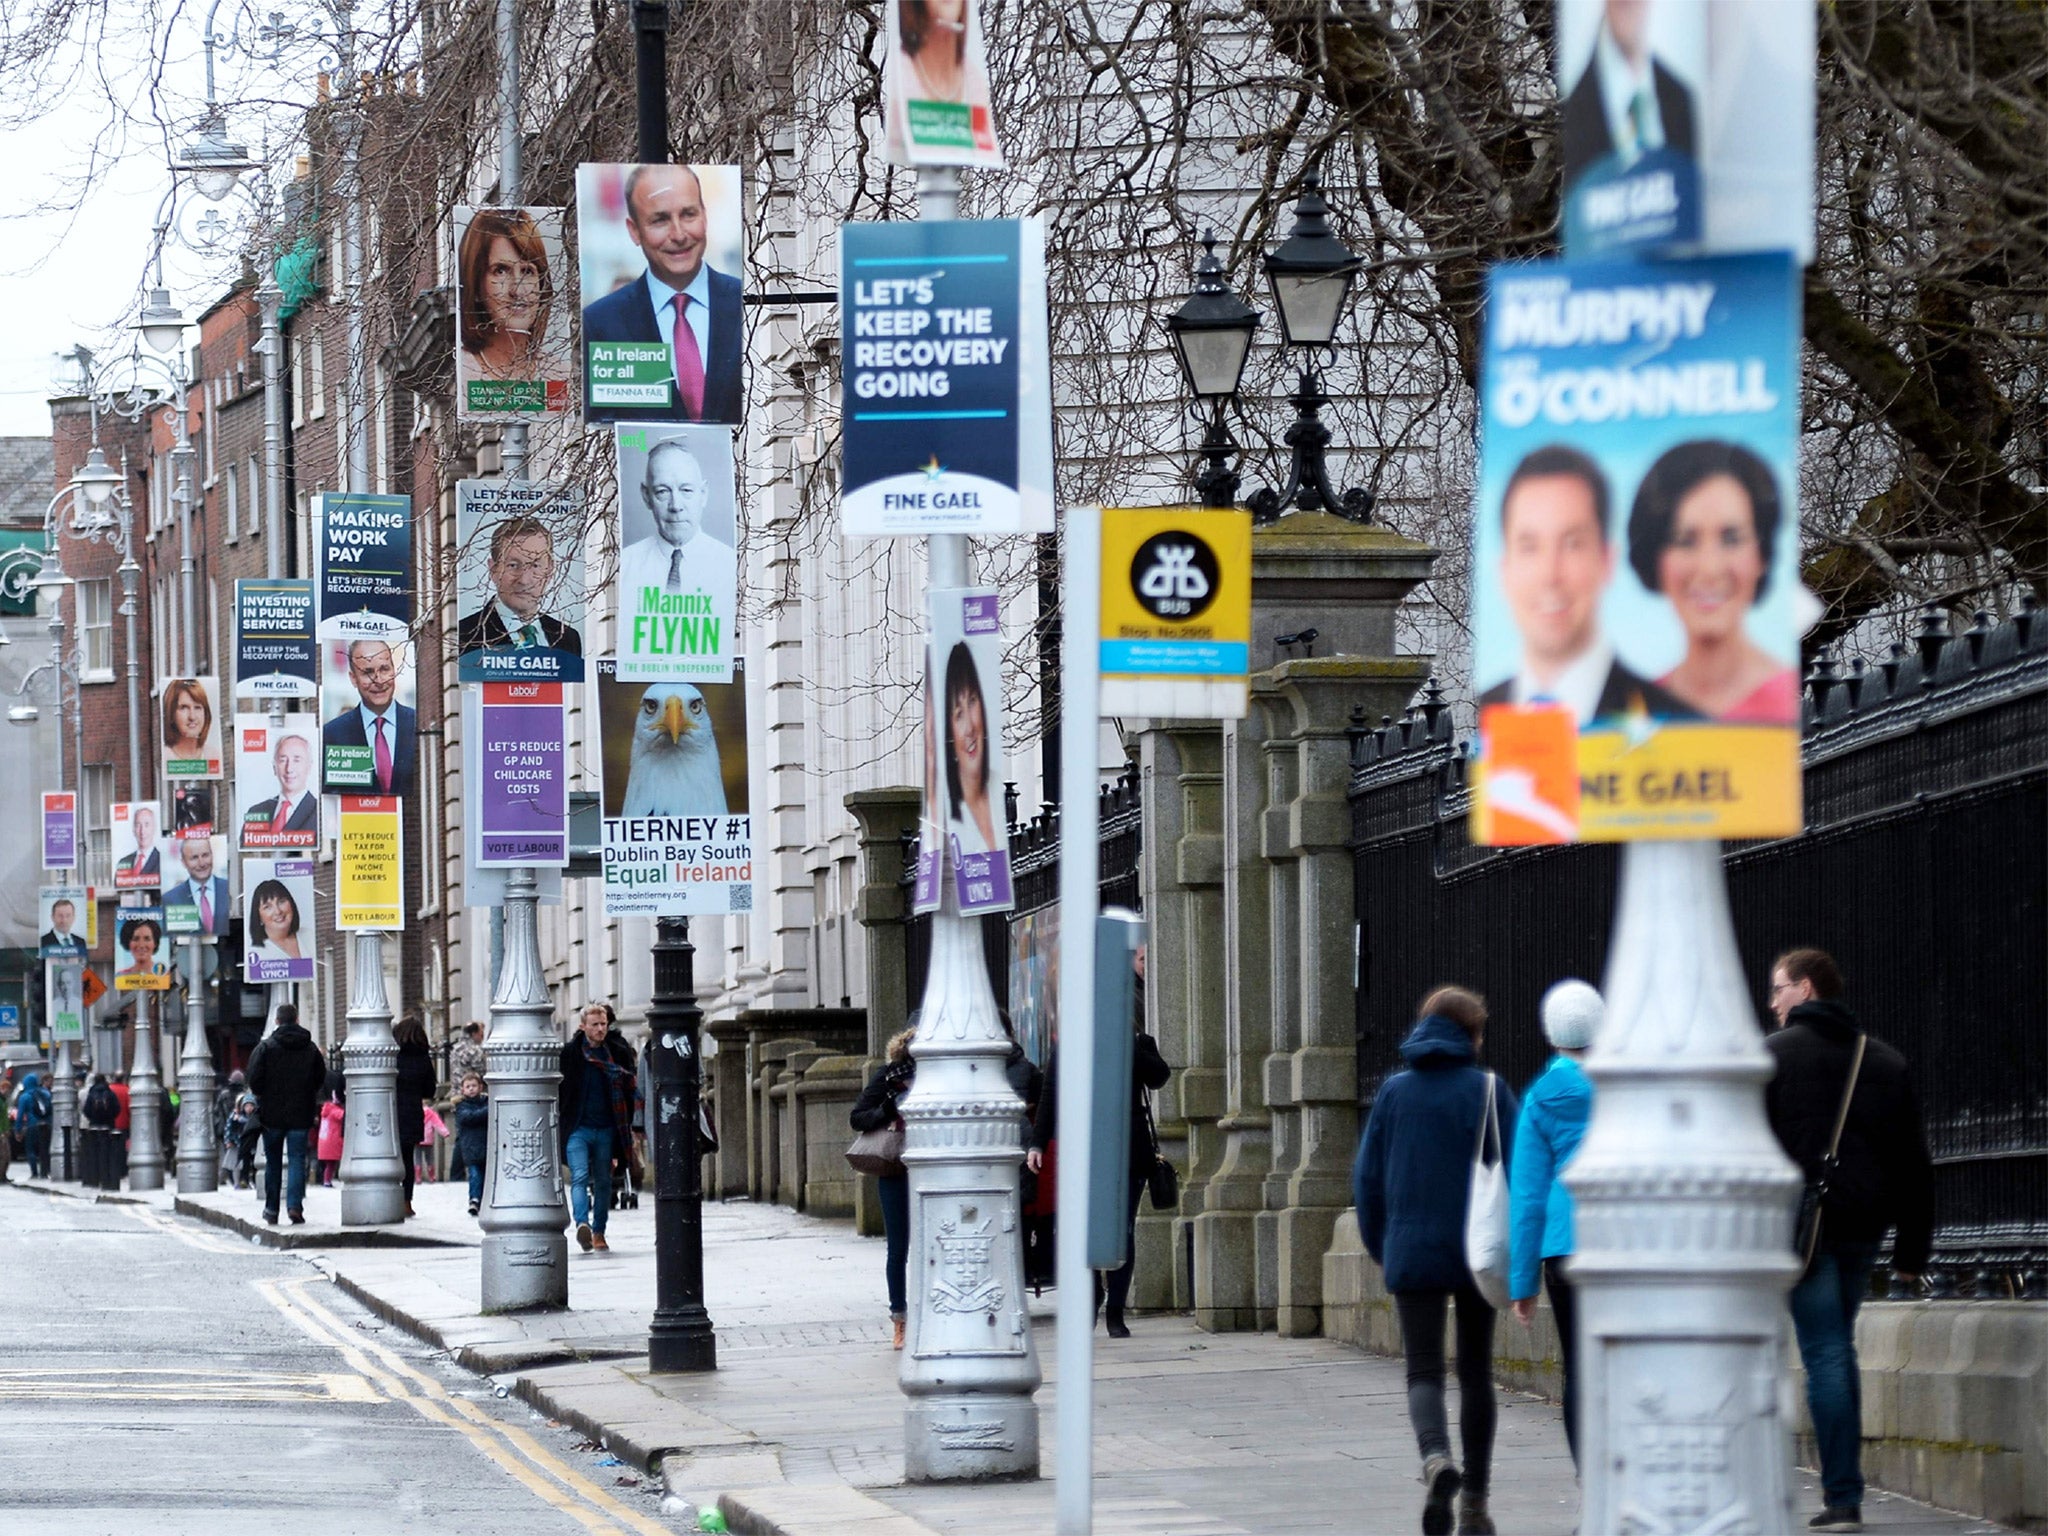 Election posters dominate the view outside Government Buildings in Dublin but almost 30 per cent of the electorate is expected to abandon the traditional parties in favour of independents